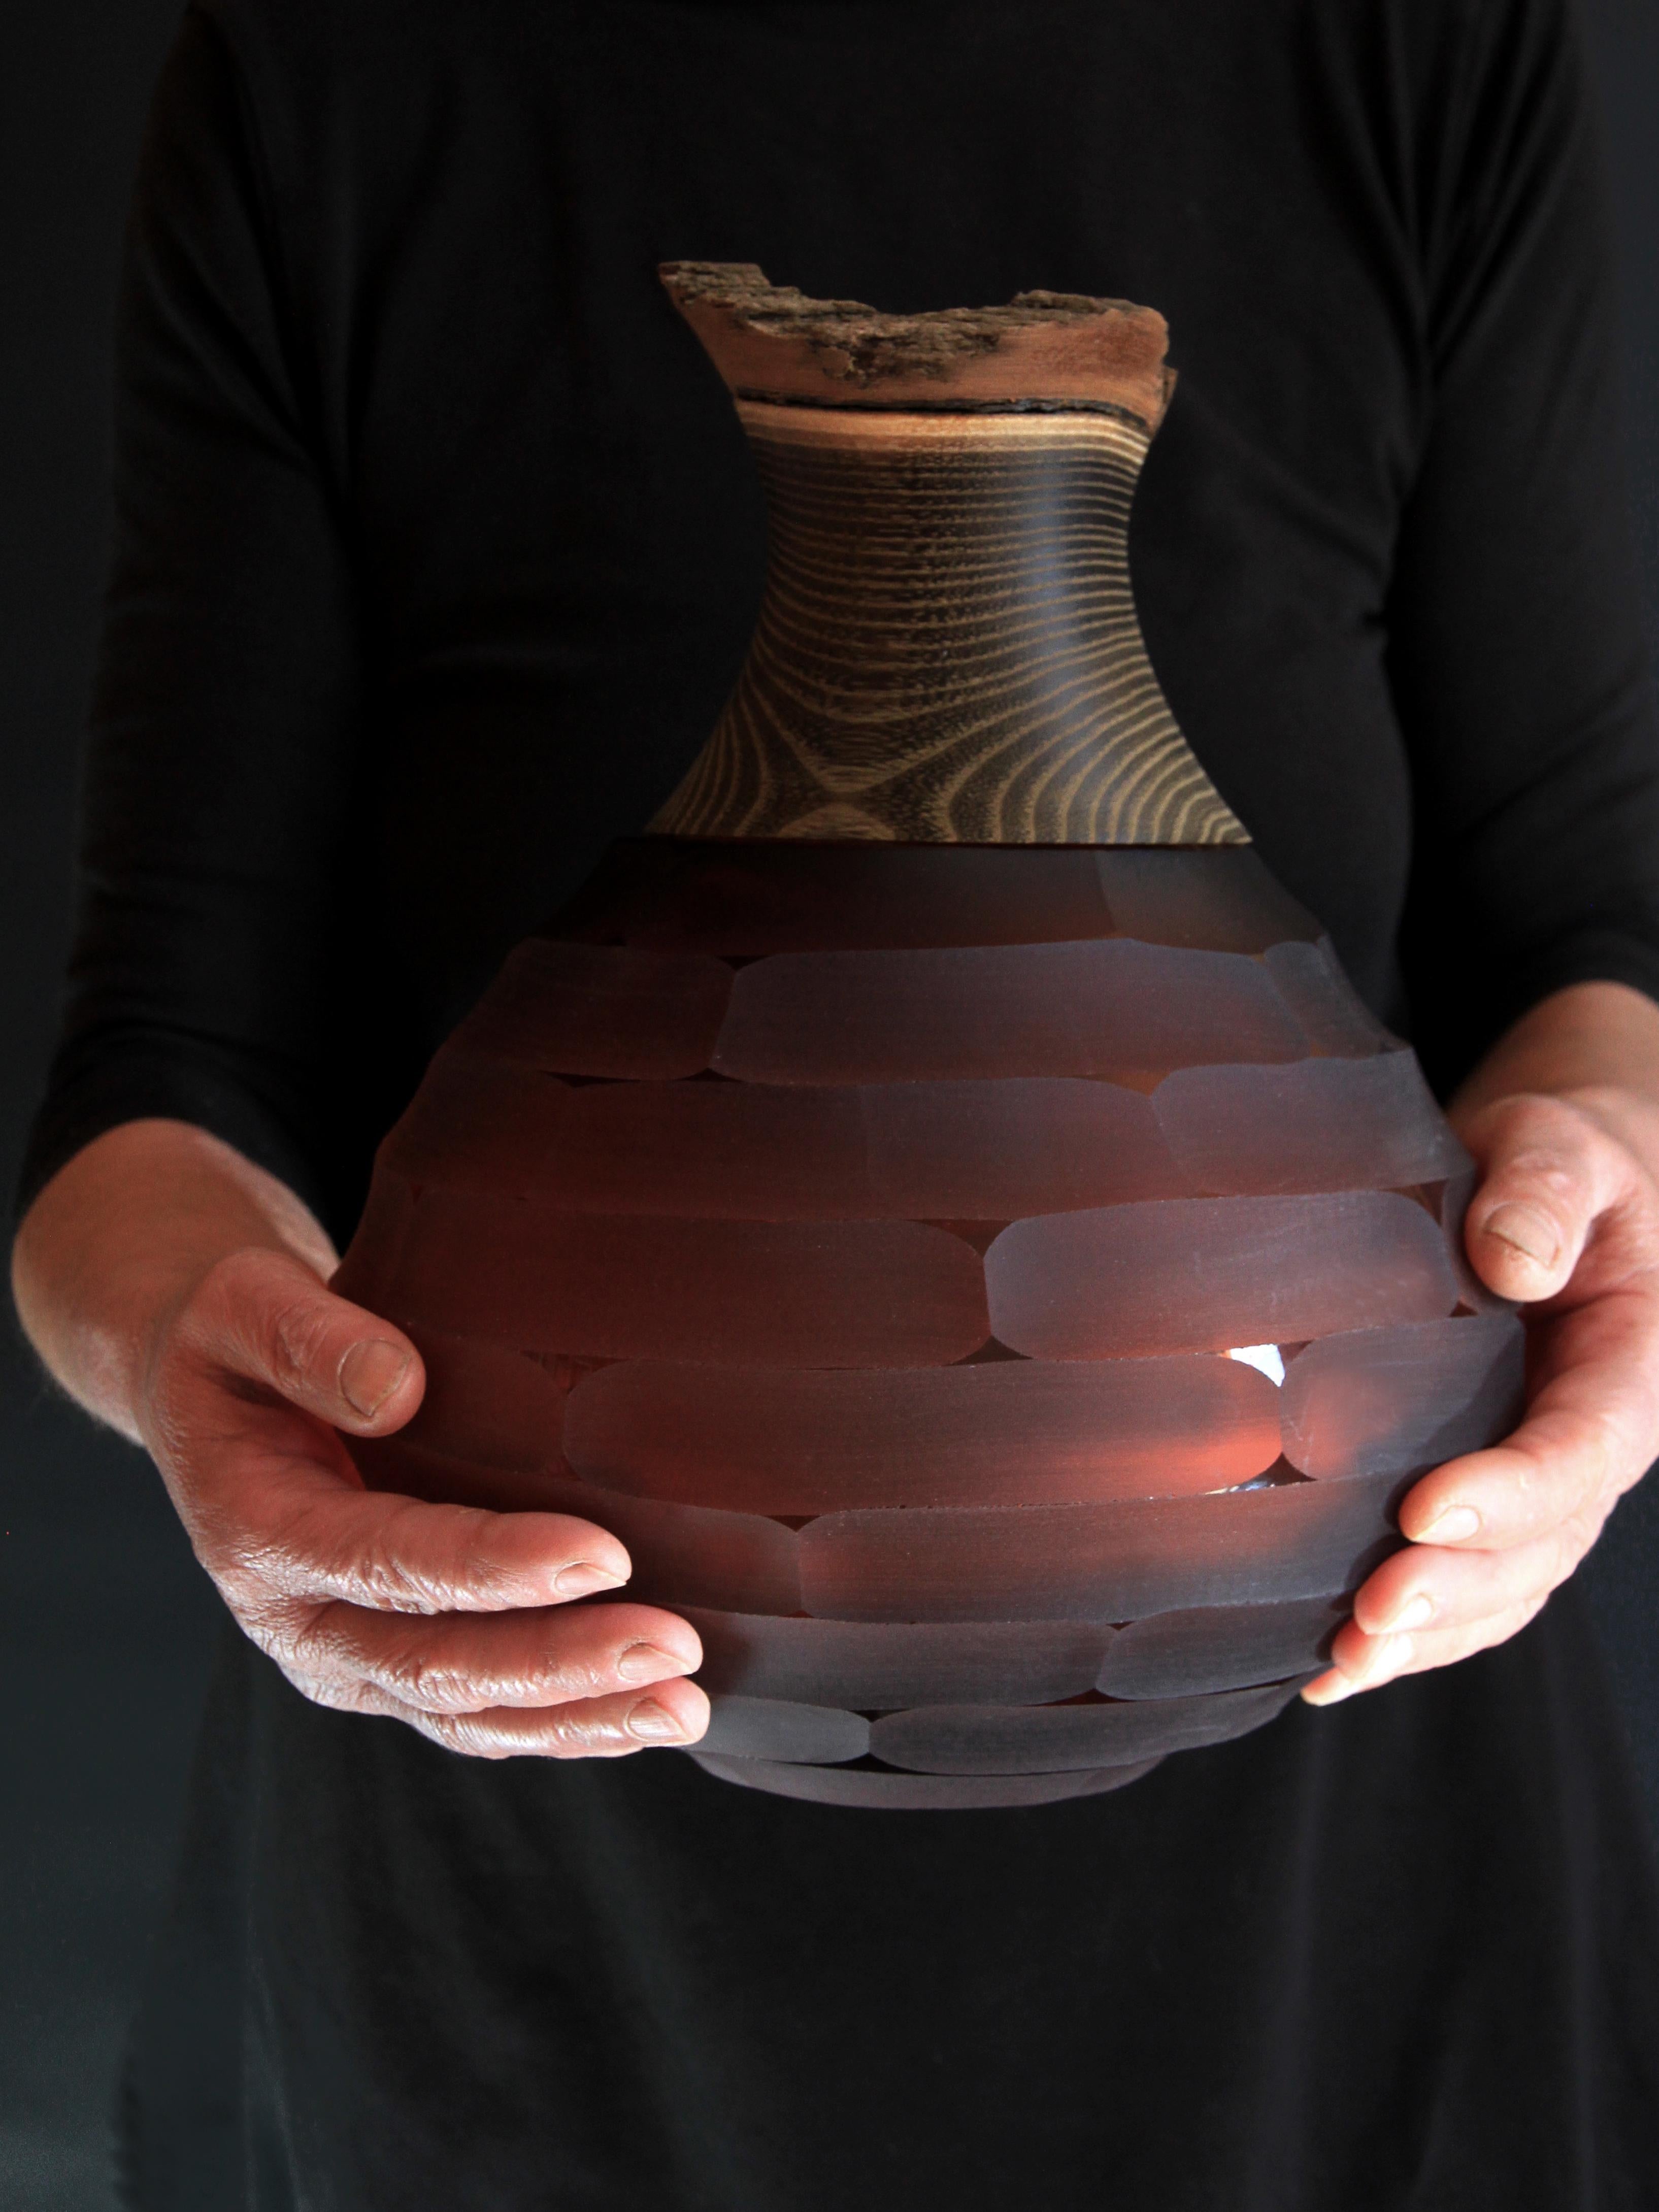 Sculpted blown glass and brass vase - Pia Wüstenberg.
Dimensions: height 30cm, diameter 23cm.
Both rough and refined, this assortment plays with the multiple metamorphosis glass grants as a material. The glass is first hand blown, and then cold